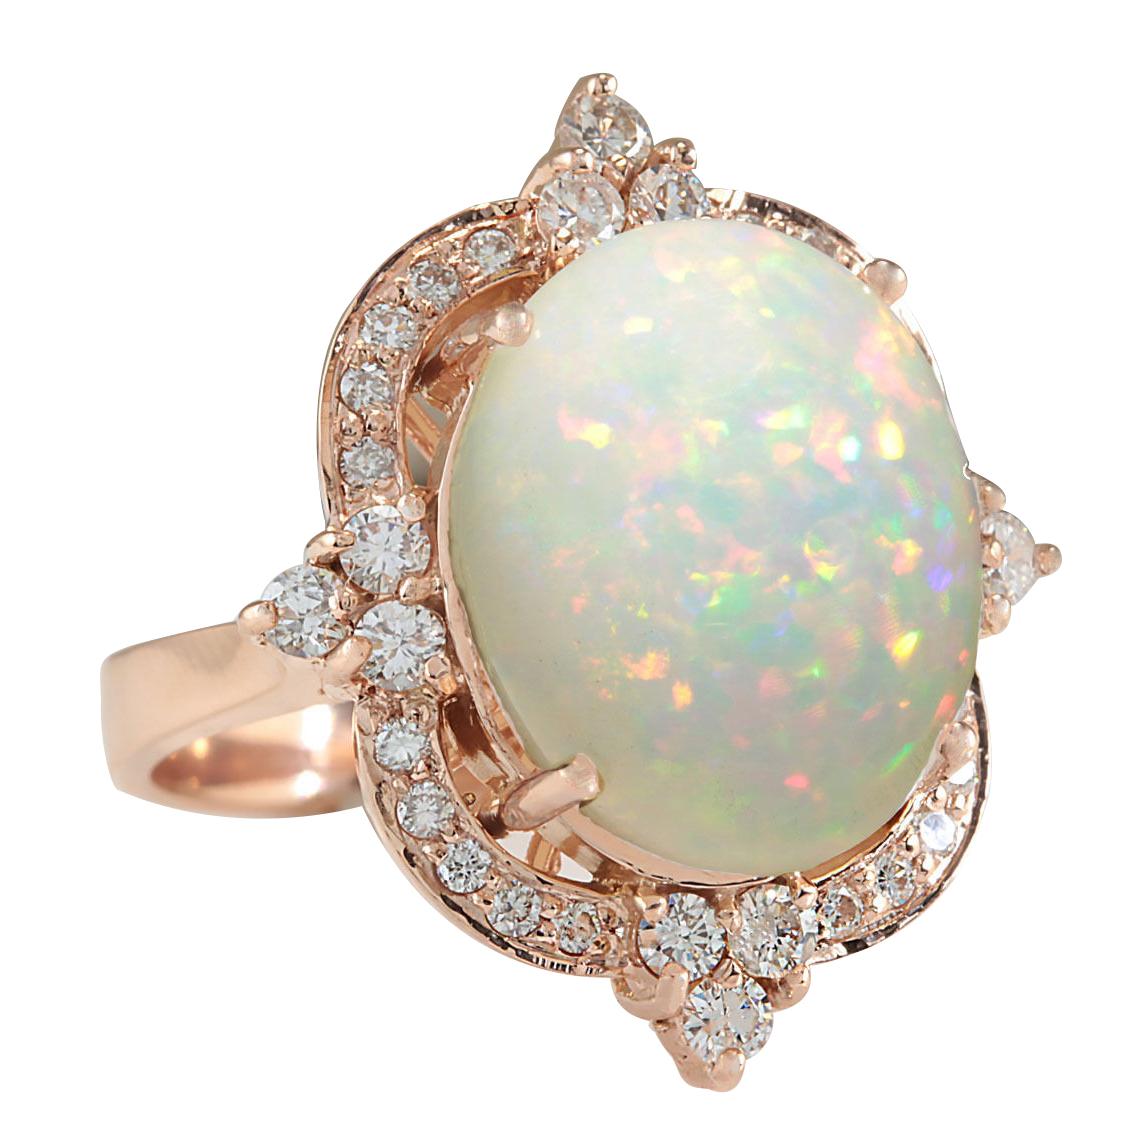 Stamped: 14K Rose Gold
Total Ring Weight: 11.2 Grams
Total Natural Opal Weight is 10.80 Carat (Measures: 16.00x12.00 mm)
Color: Multicolor
Total Natural Diamond Weight is 0.80 Carat
Color: F-G, Clarity: VS2-SI1
Face Measures: 26.05x21.85 mm
Sku: